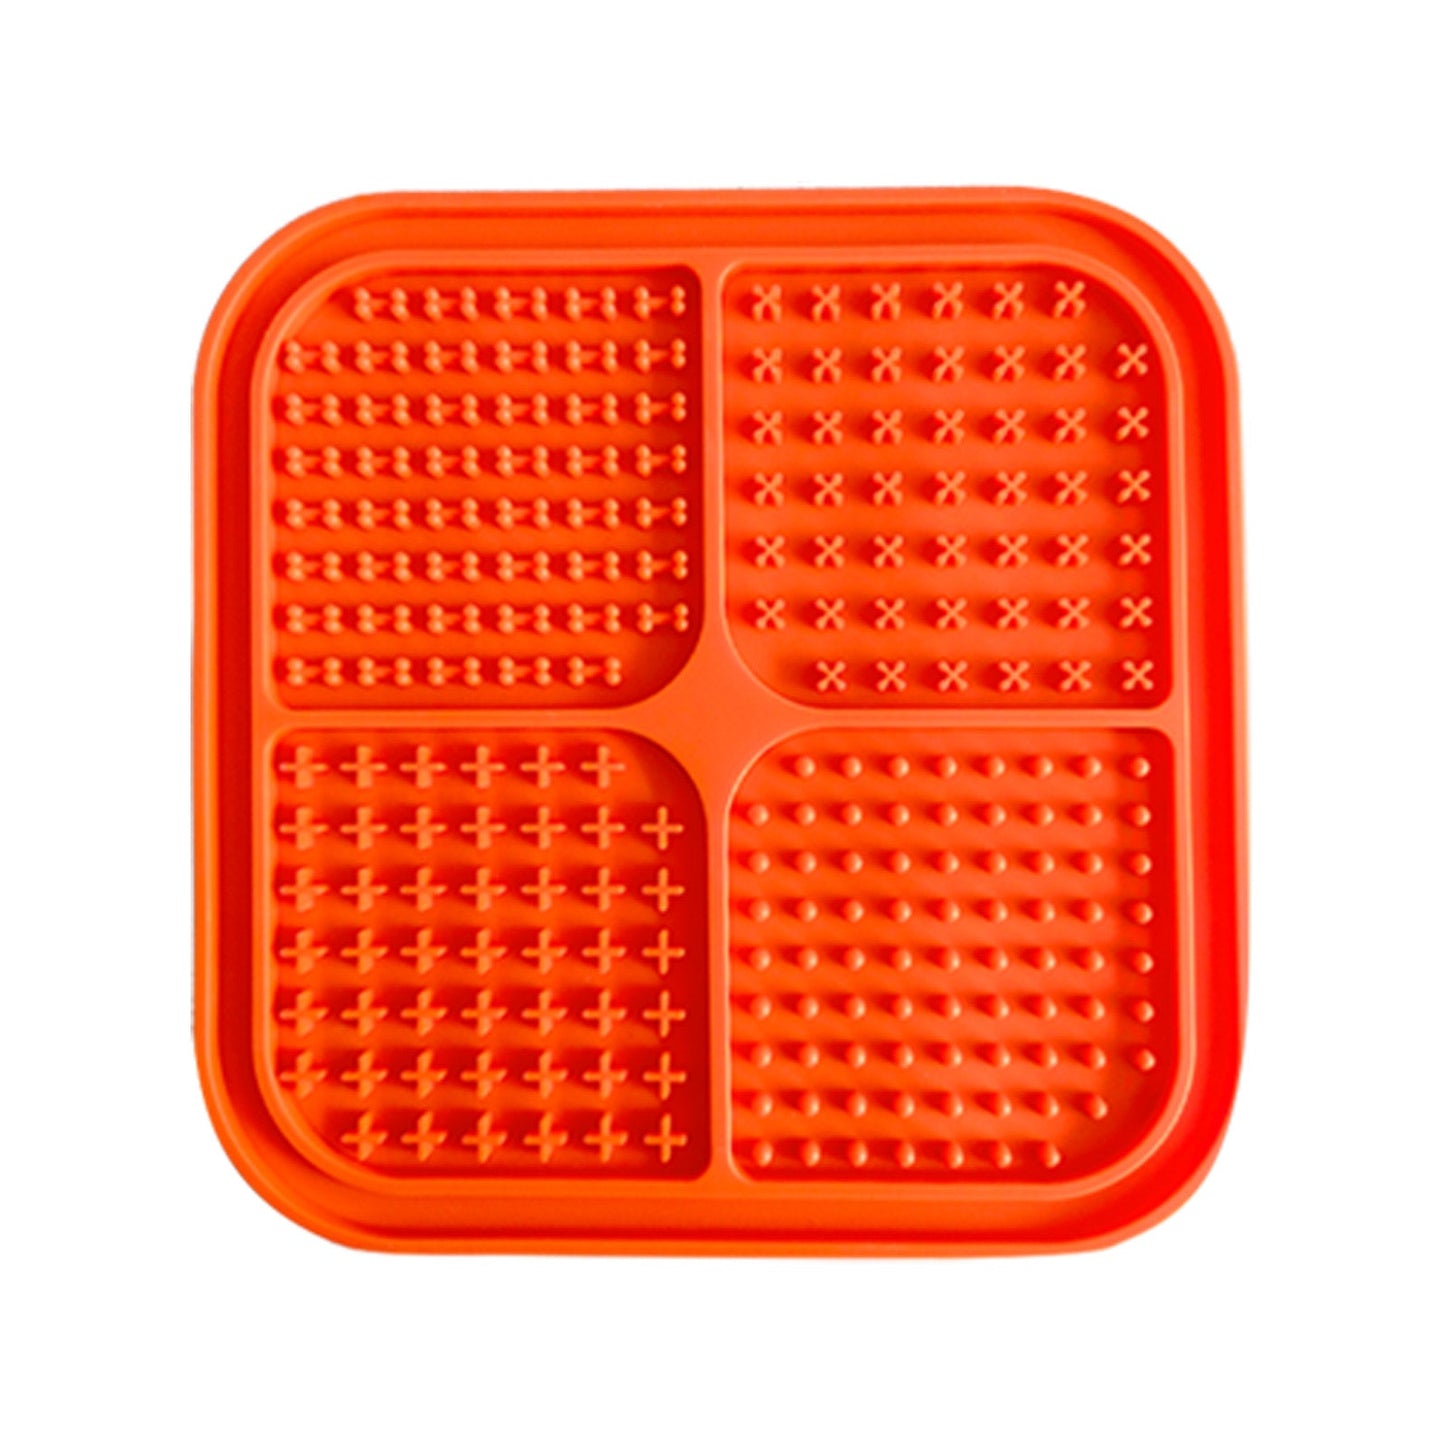 Pawfriends 4in1 Silicone Pet Lick Mat Orange